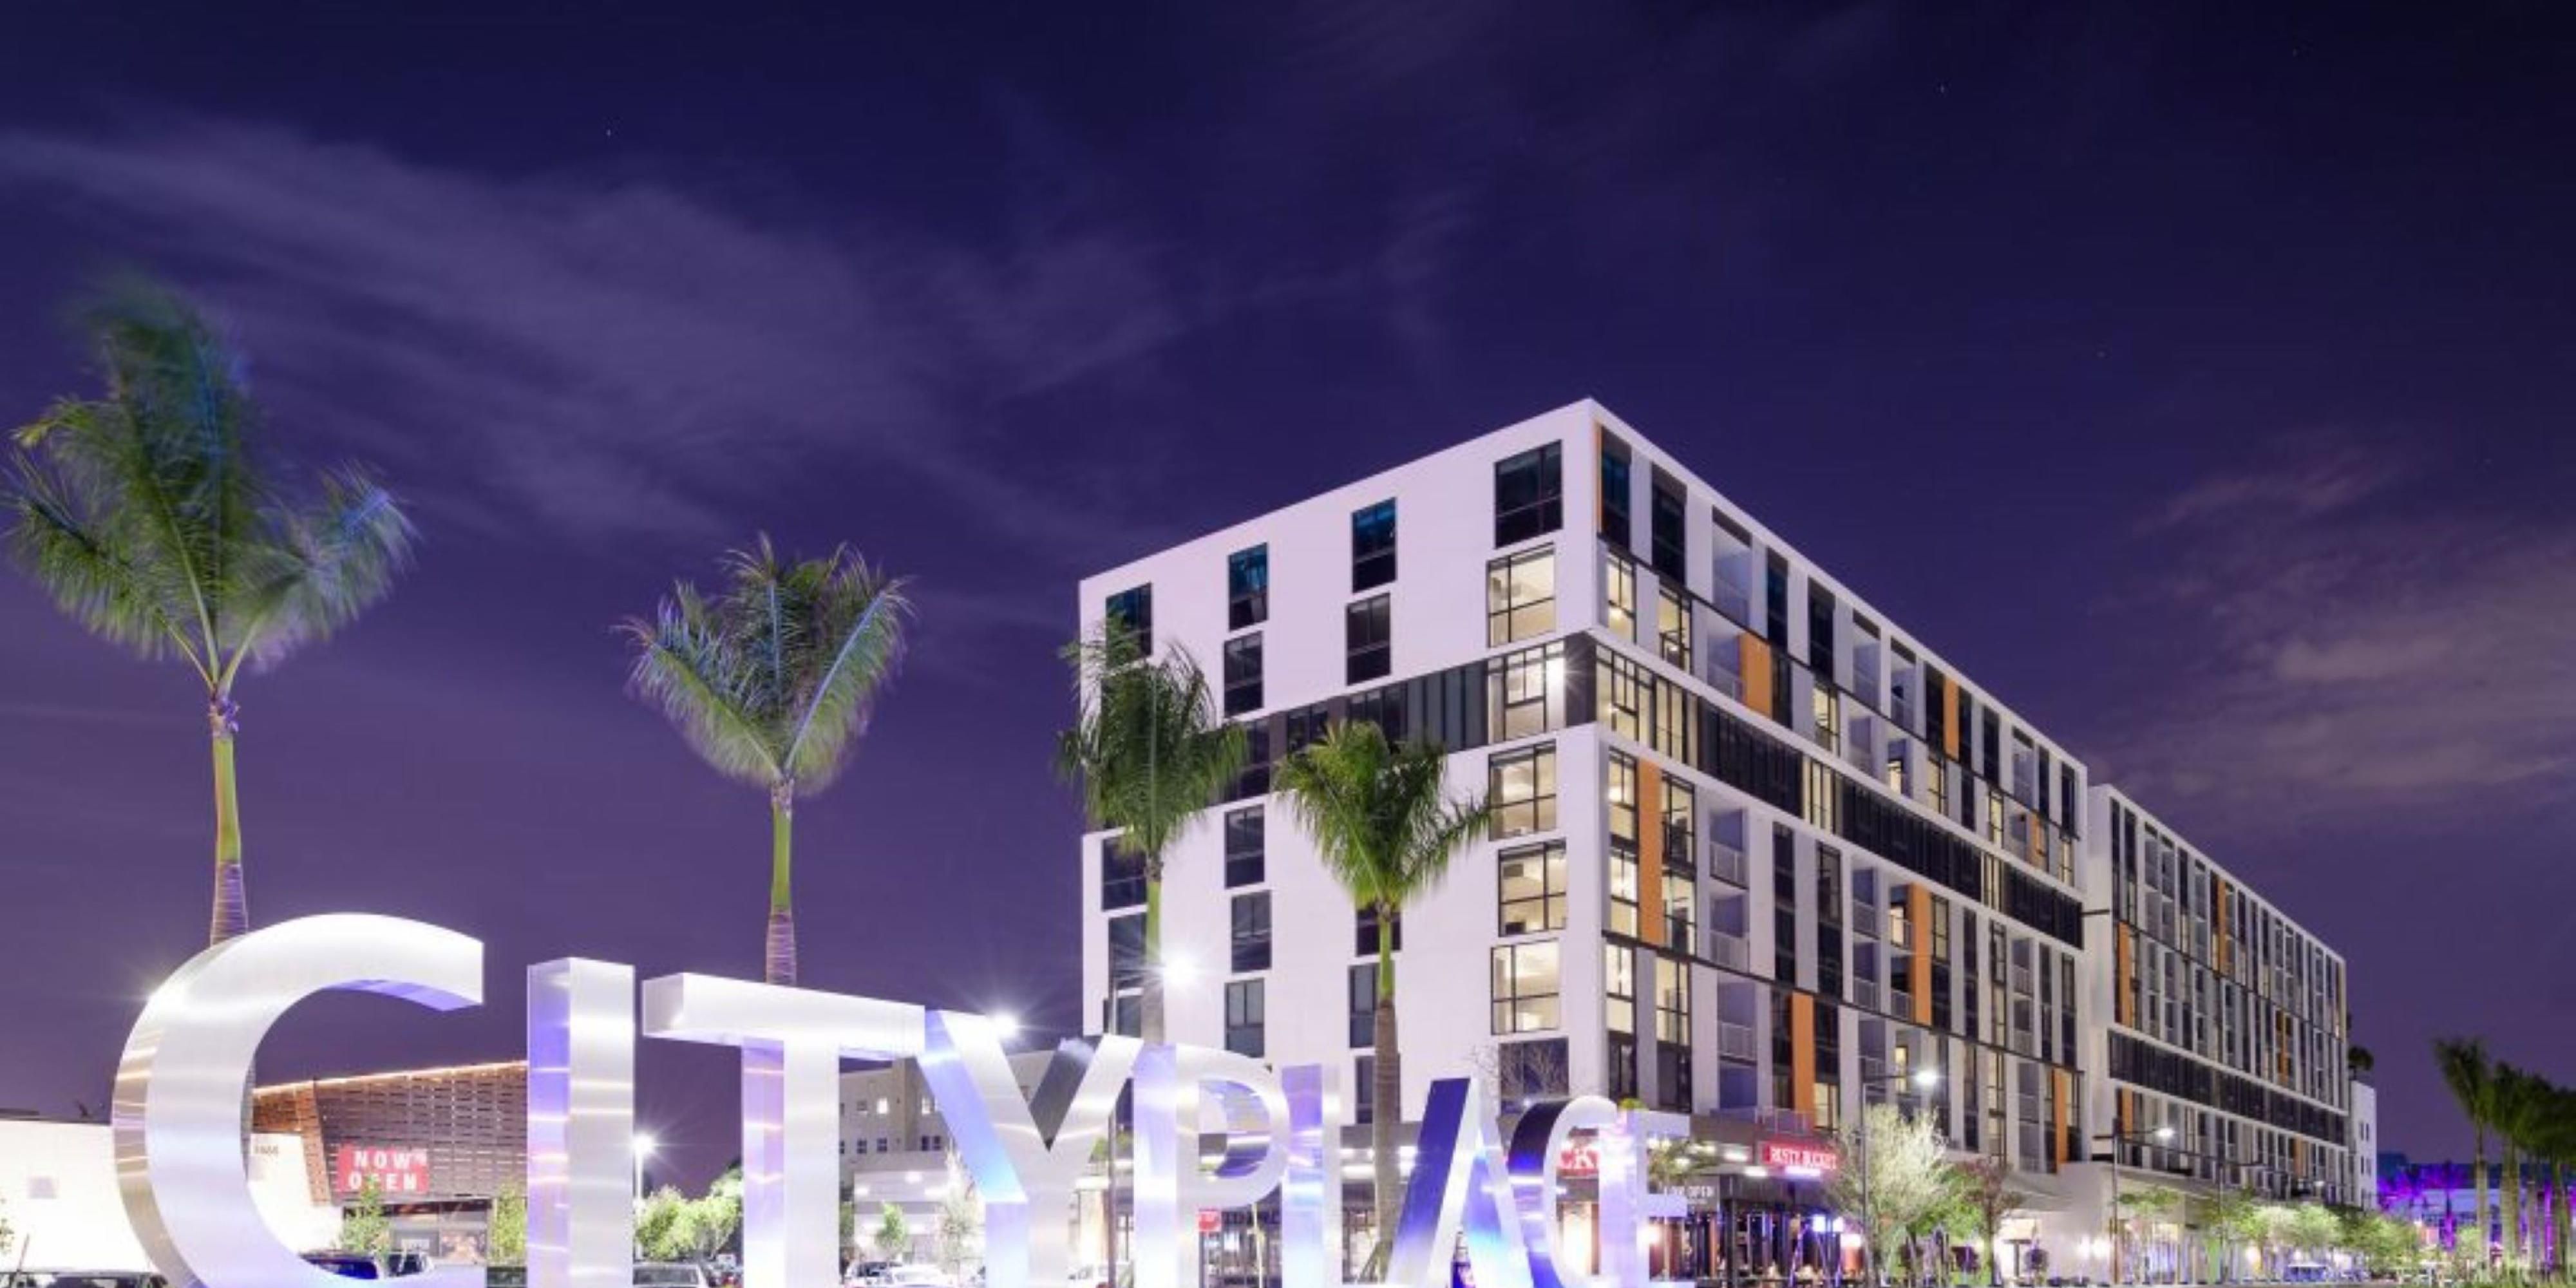 Discover quality shopping mall in Doral, entertainment, dining & luxury residential homes in the dynamic center of Doral in the heart of Miami Dade County.  Just steps away from the Holiday Inn Express, CityPlace Doral is a one-stop destination that has options for everyone.